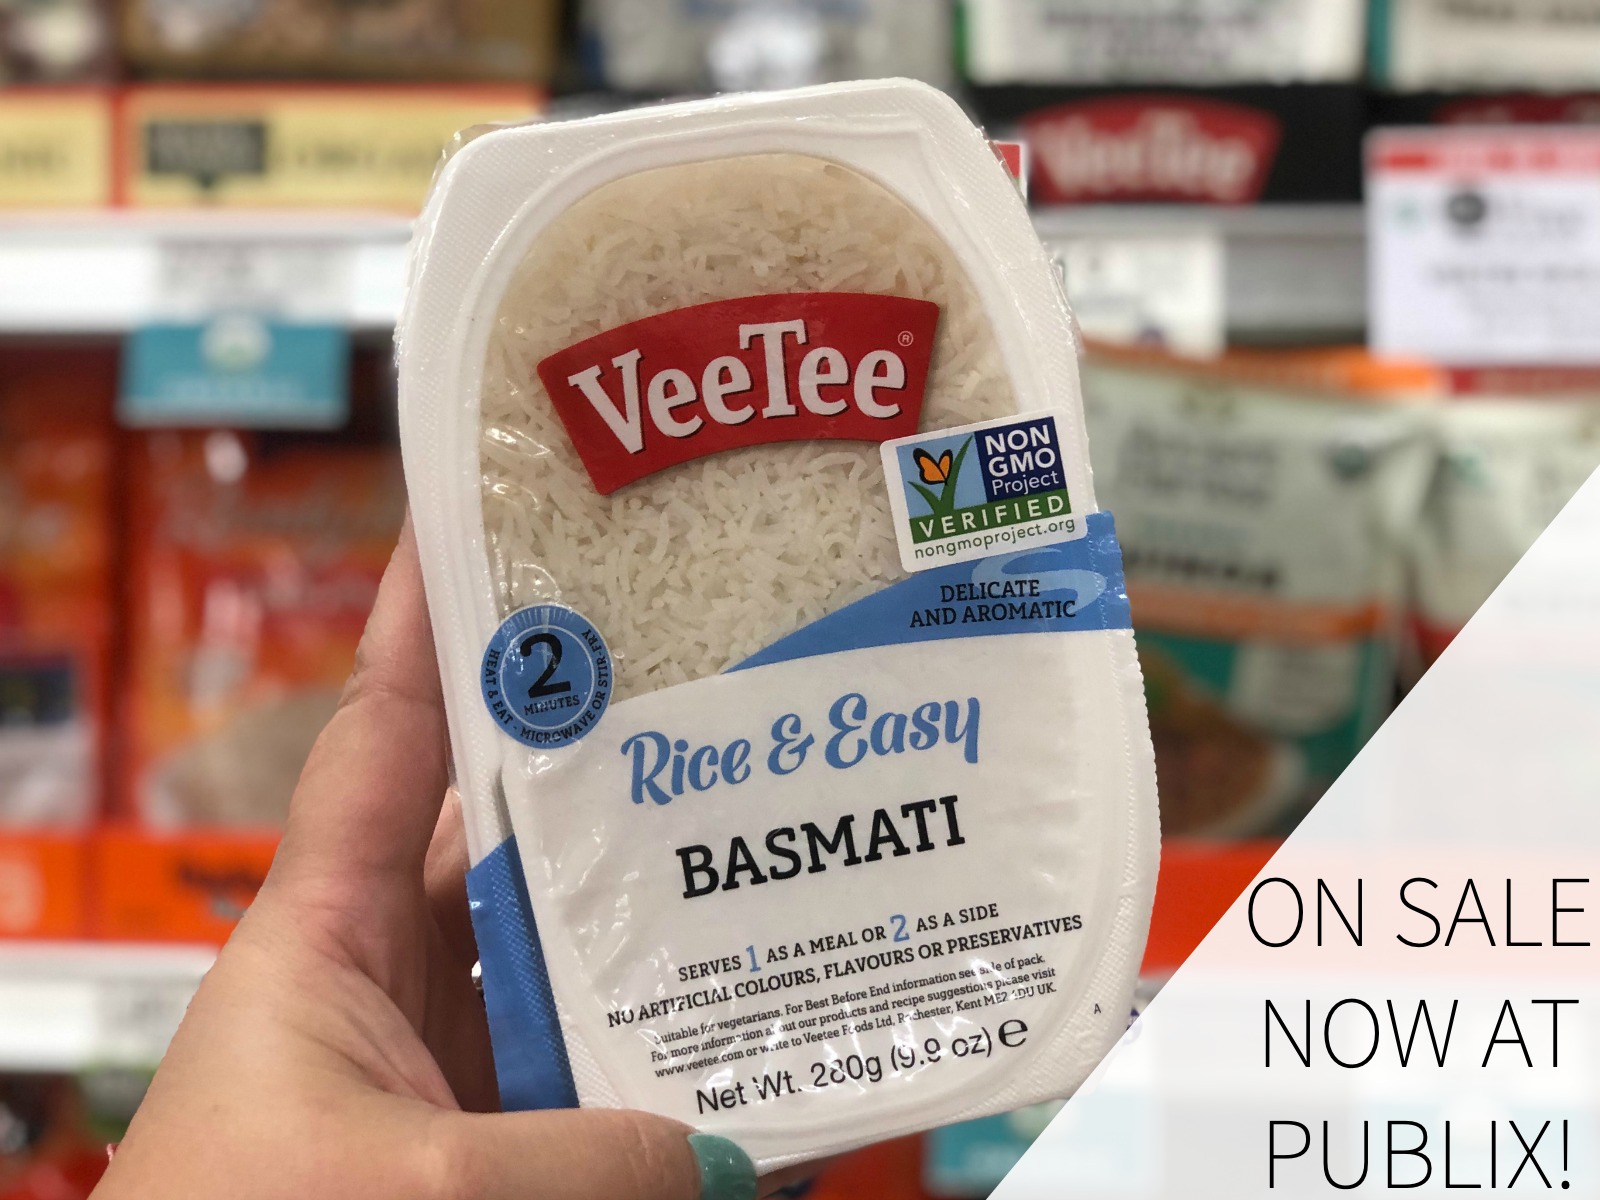 Stock Up On Veetee Rice During The Sale At Publix